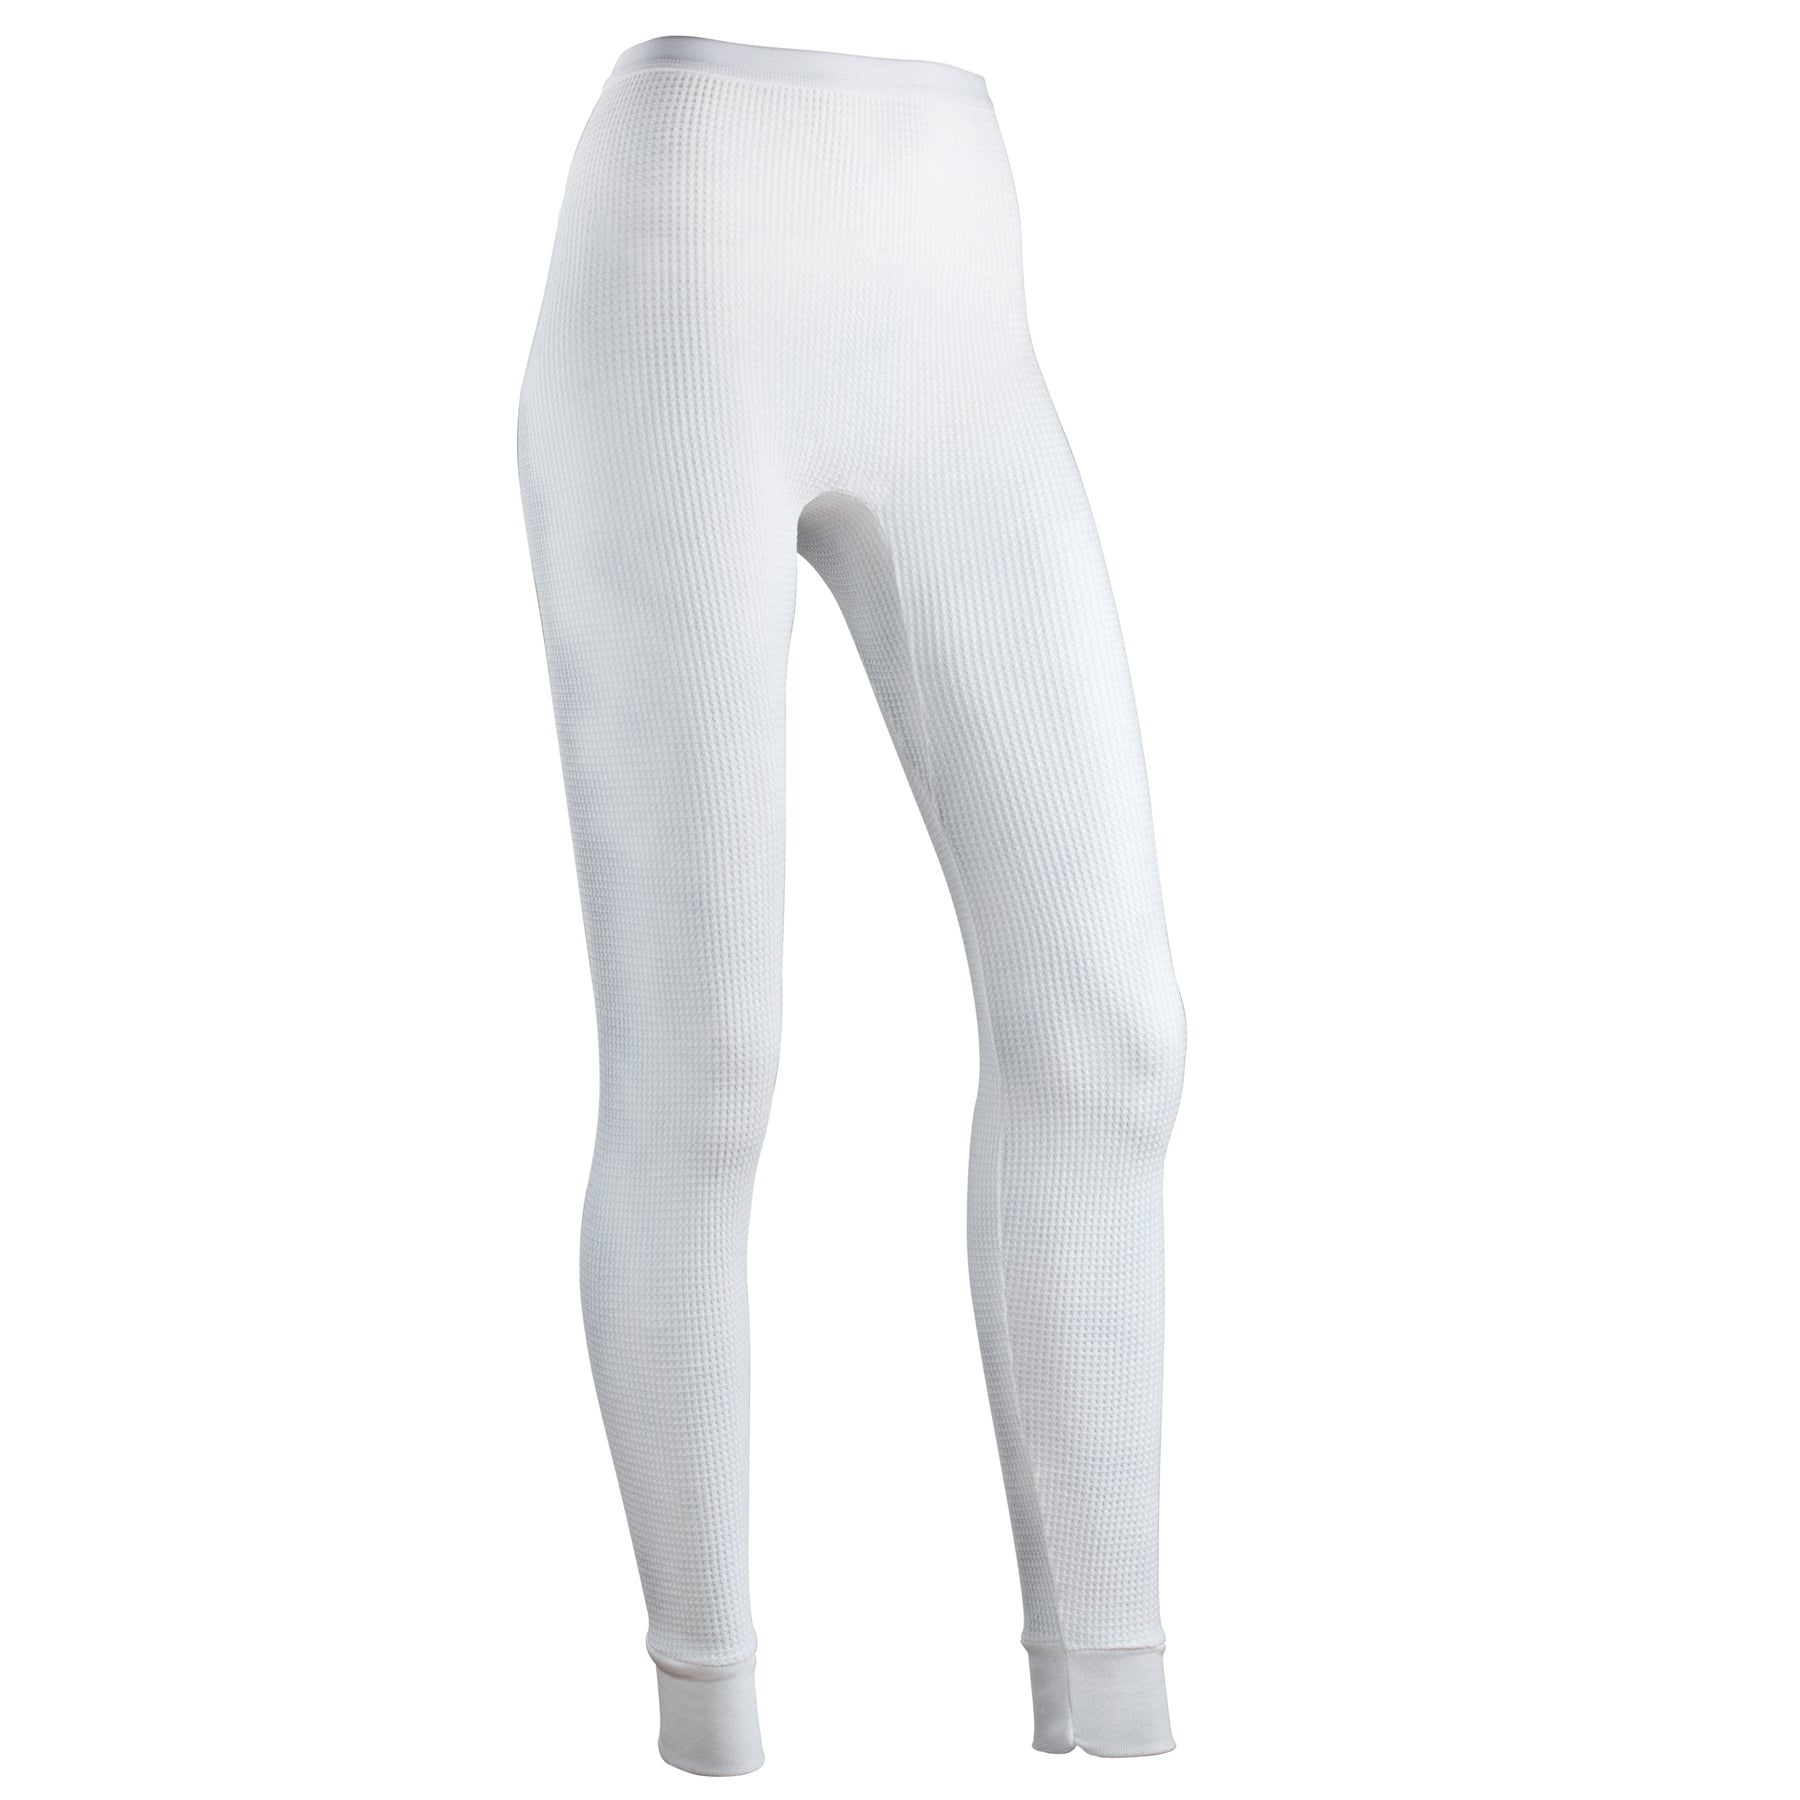  Indera Traditional Long Johns Thermal Underwear for Men in Tall  Sizes, Natural, Medium : Clothing, Shoes & Jewelry